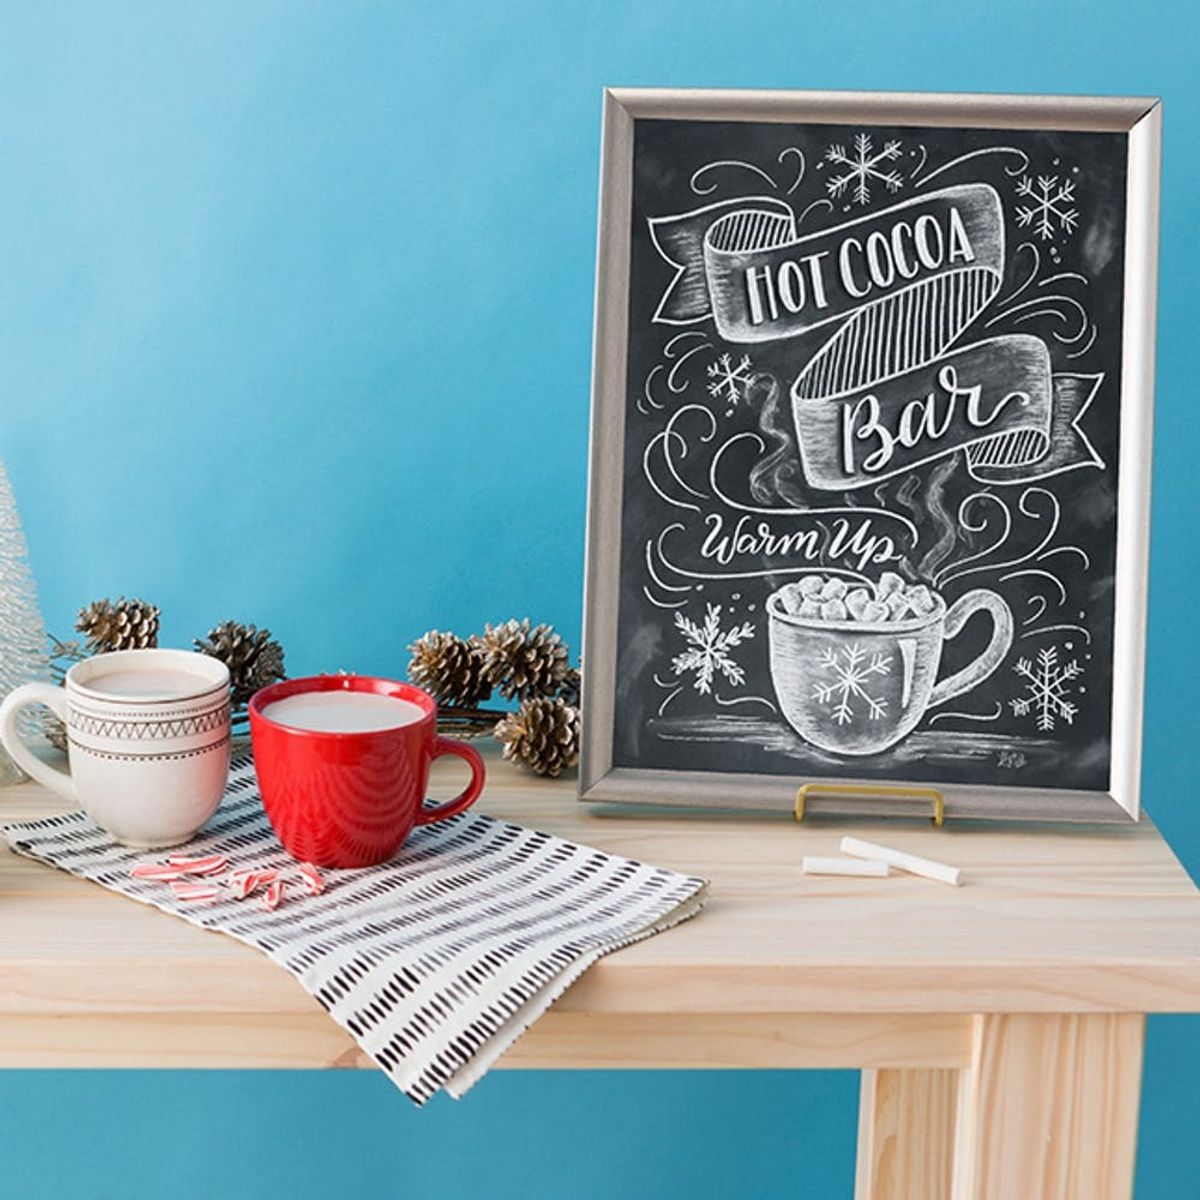 Warm Up Your Holiday Parties With This Cute DIY Hot Cocoa Bar Chalkboard Sign